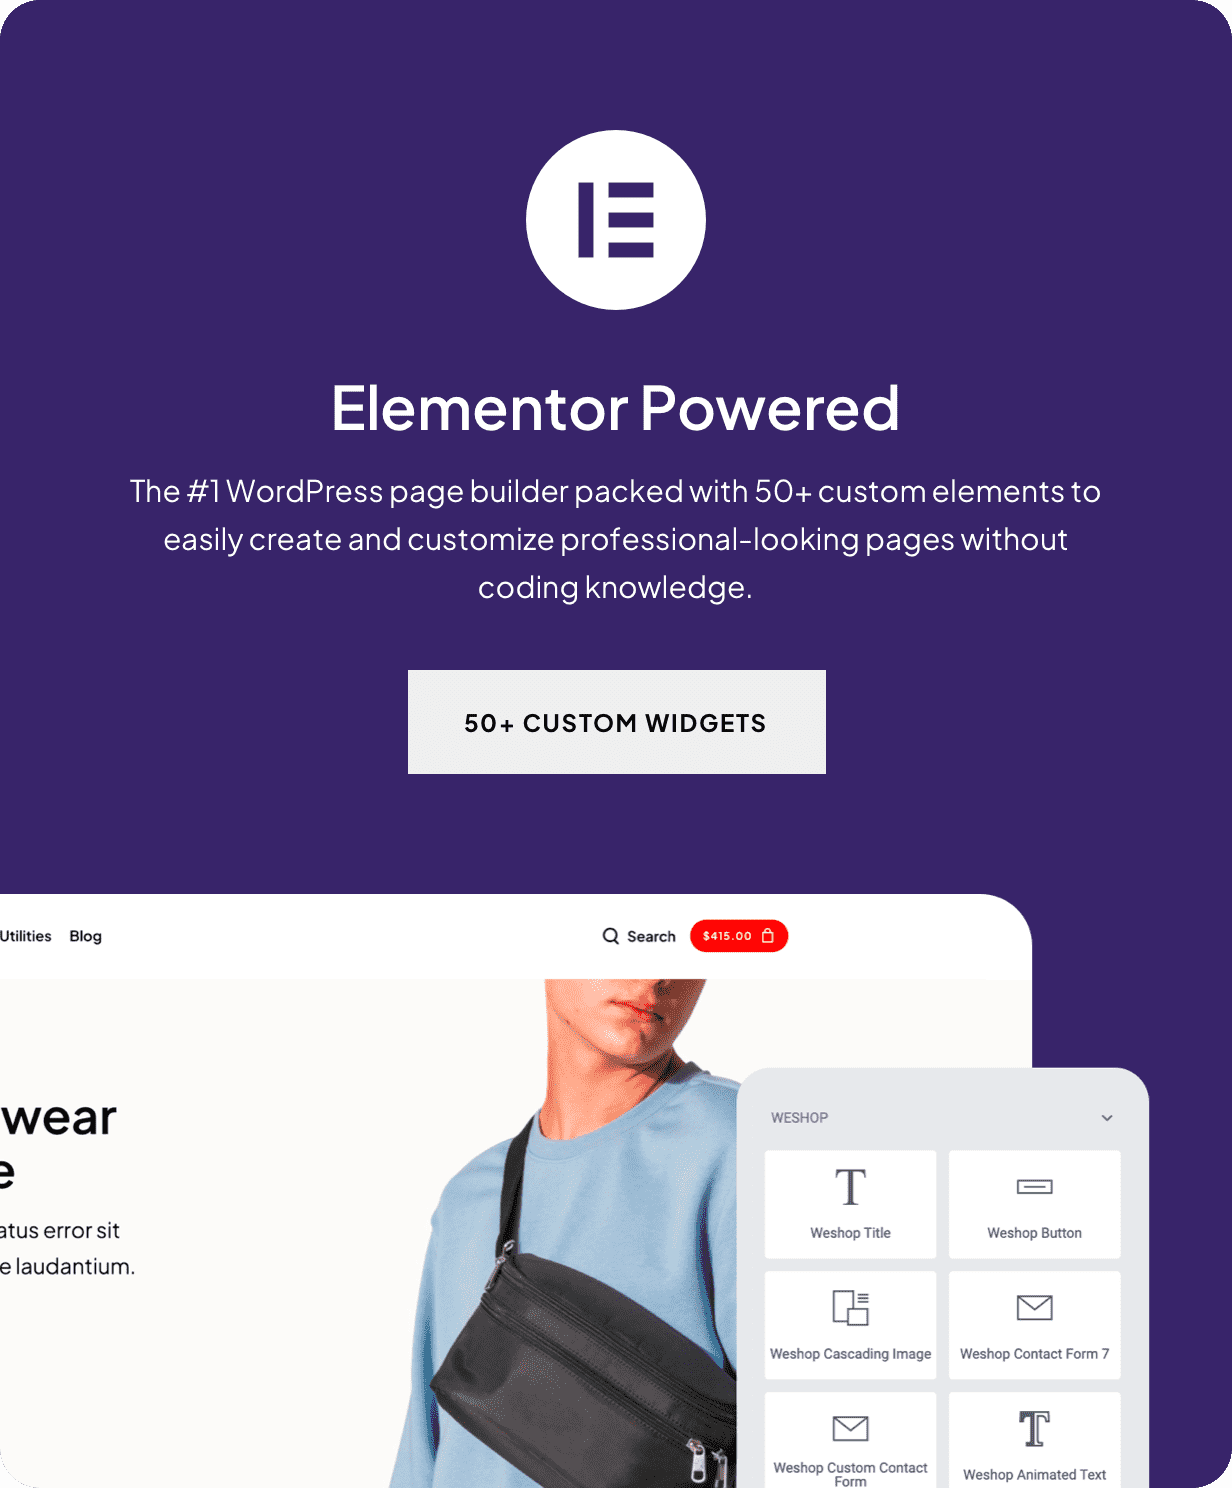 WeShop is an Elementor Powered theme